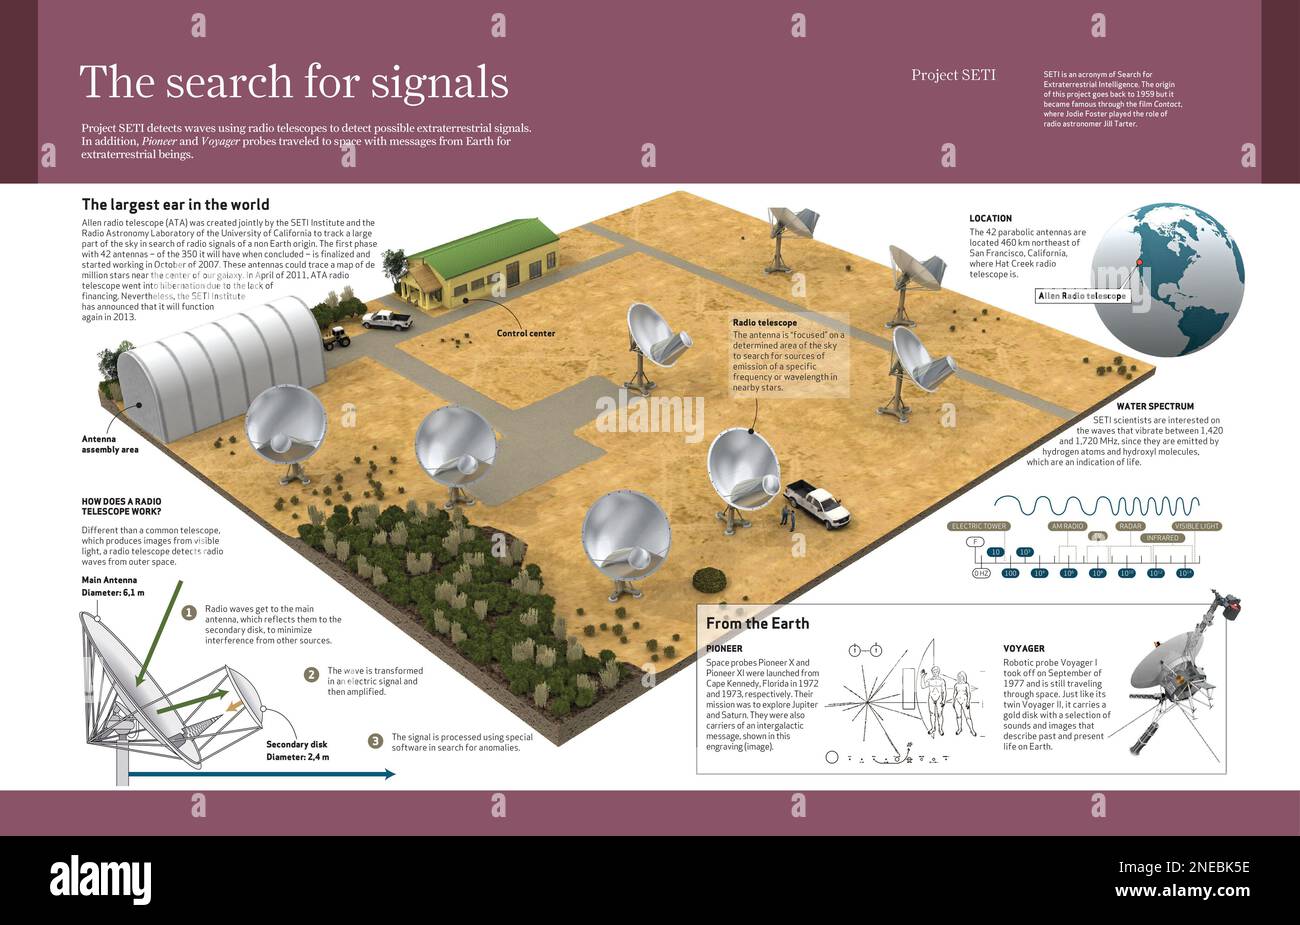 Infographic about SETI project and the Allen (ATA) radio telescope, capable of detecting possible alien signals. [Adobe InDesign (.indd); 4960x3188]. Stock Photo